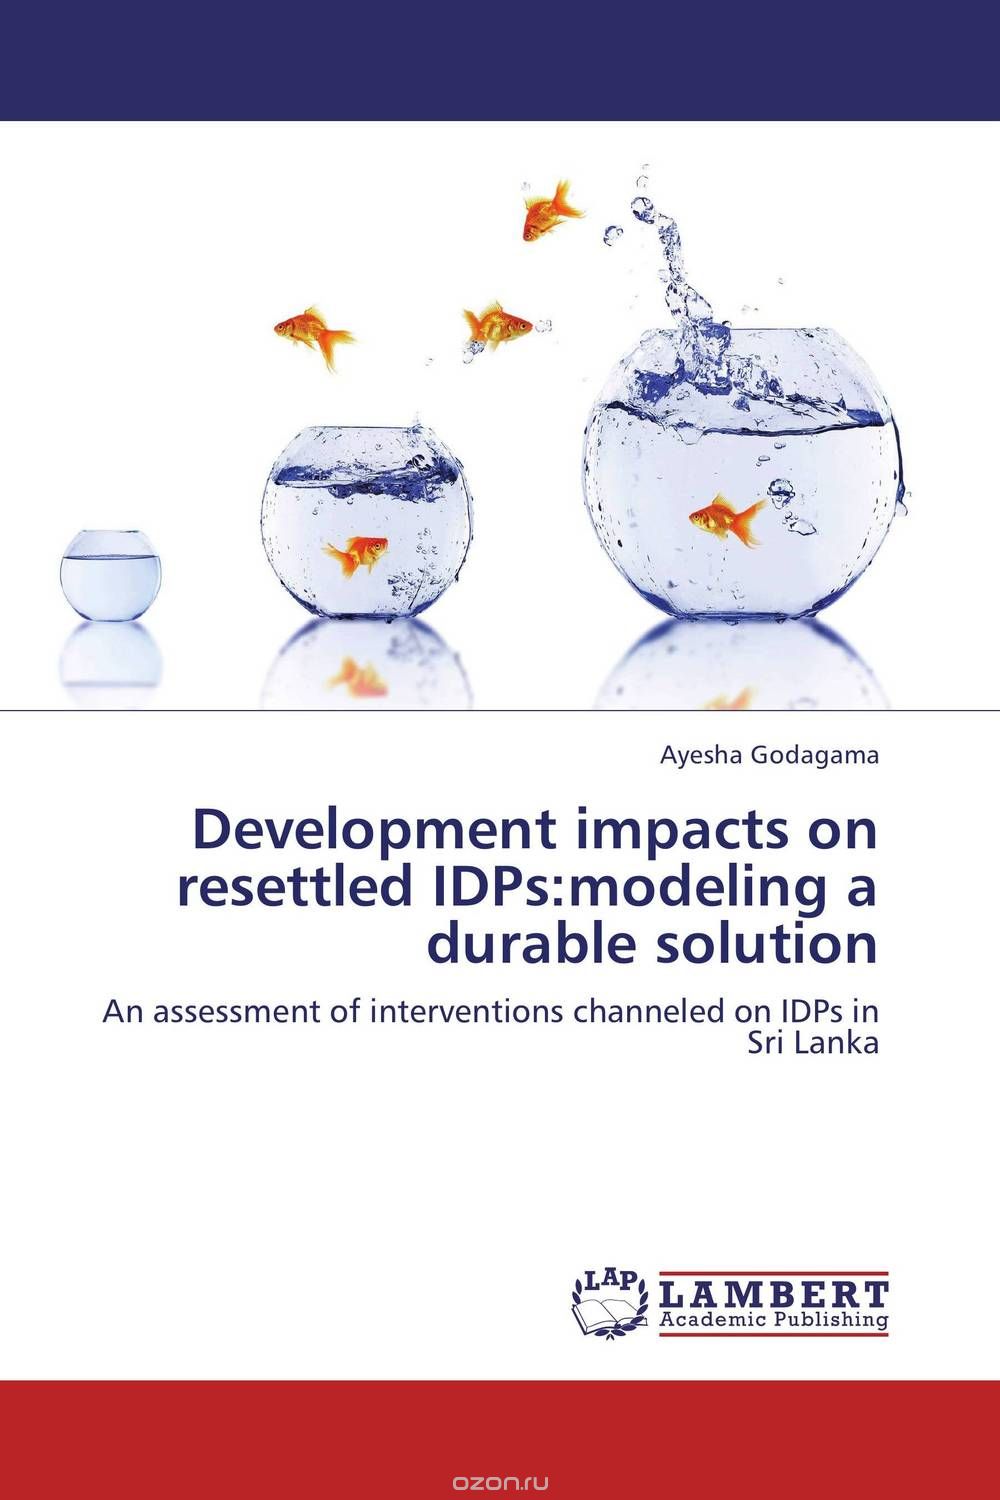 Development impacts on resettled IDPs:modeling a durable solution